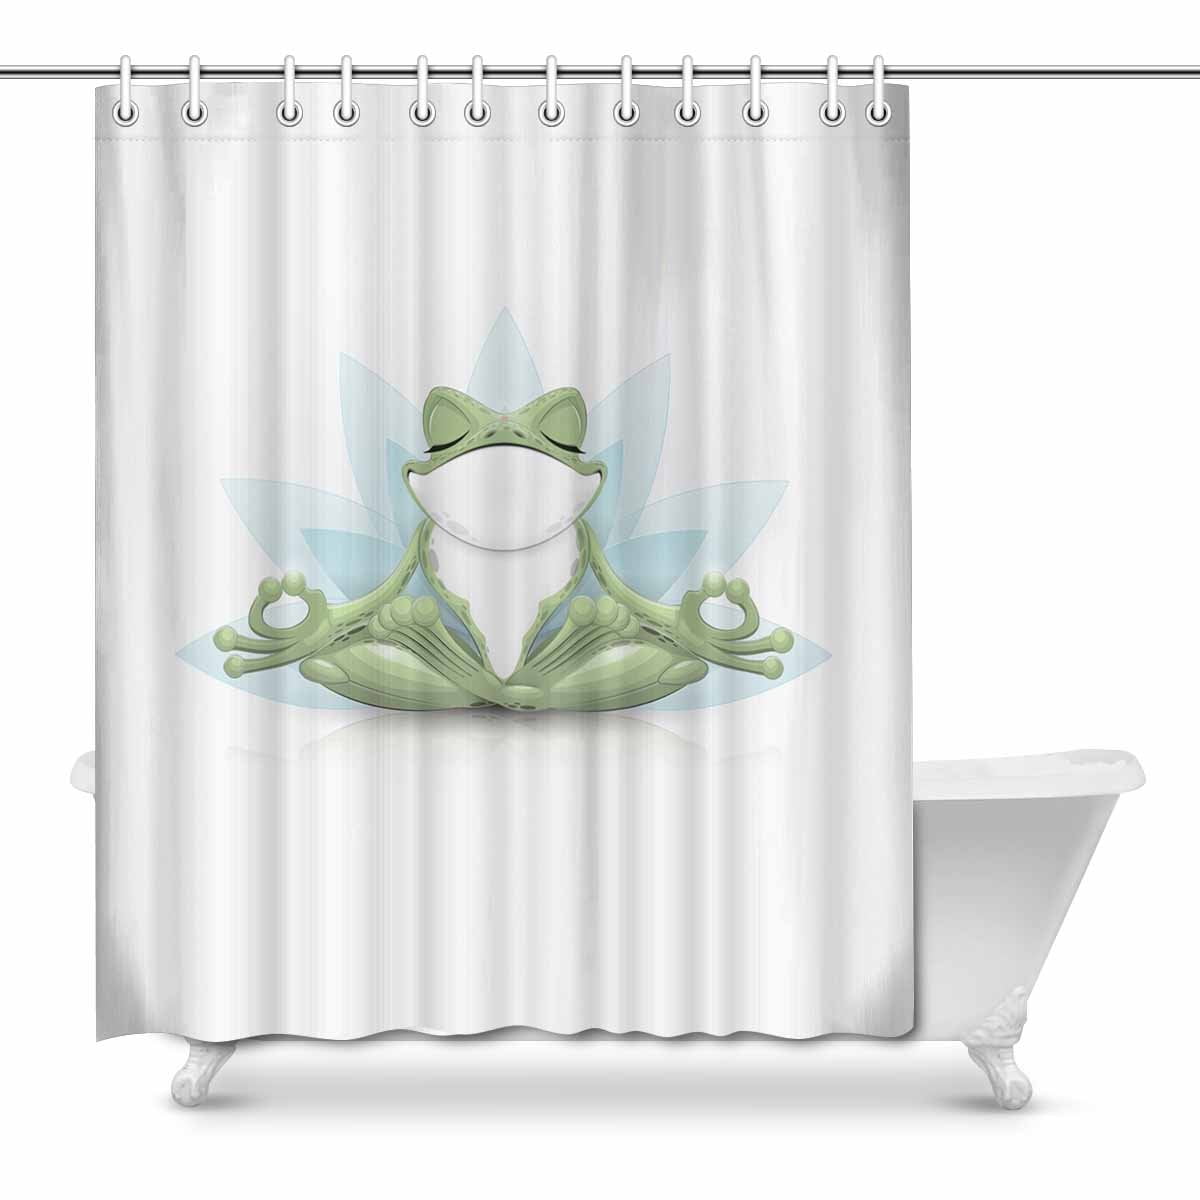 72x72"Frogs Polyester Fabric Shower Curtain Bathroom Mat 12Hook 2213 